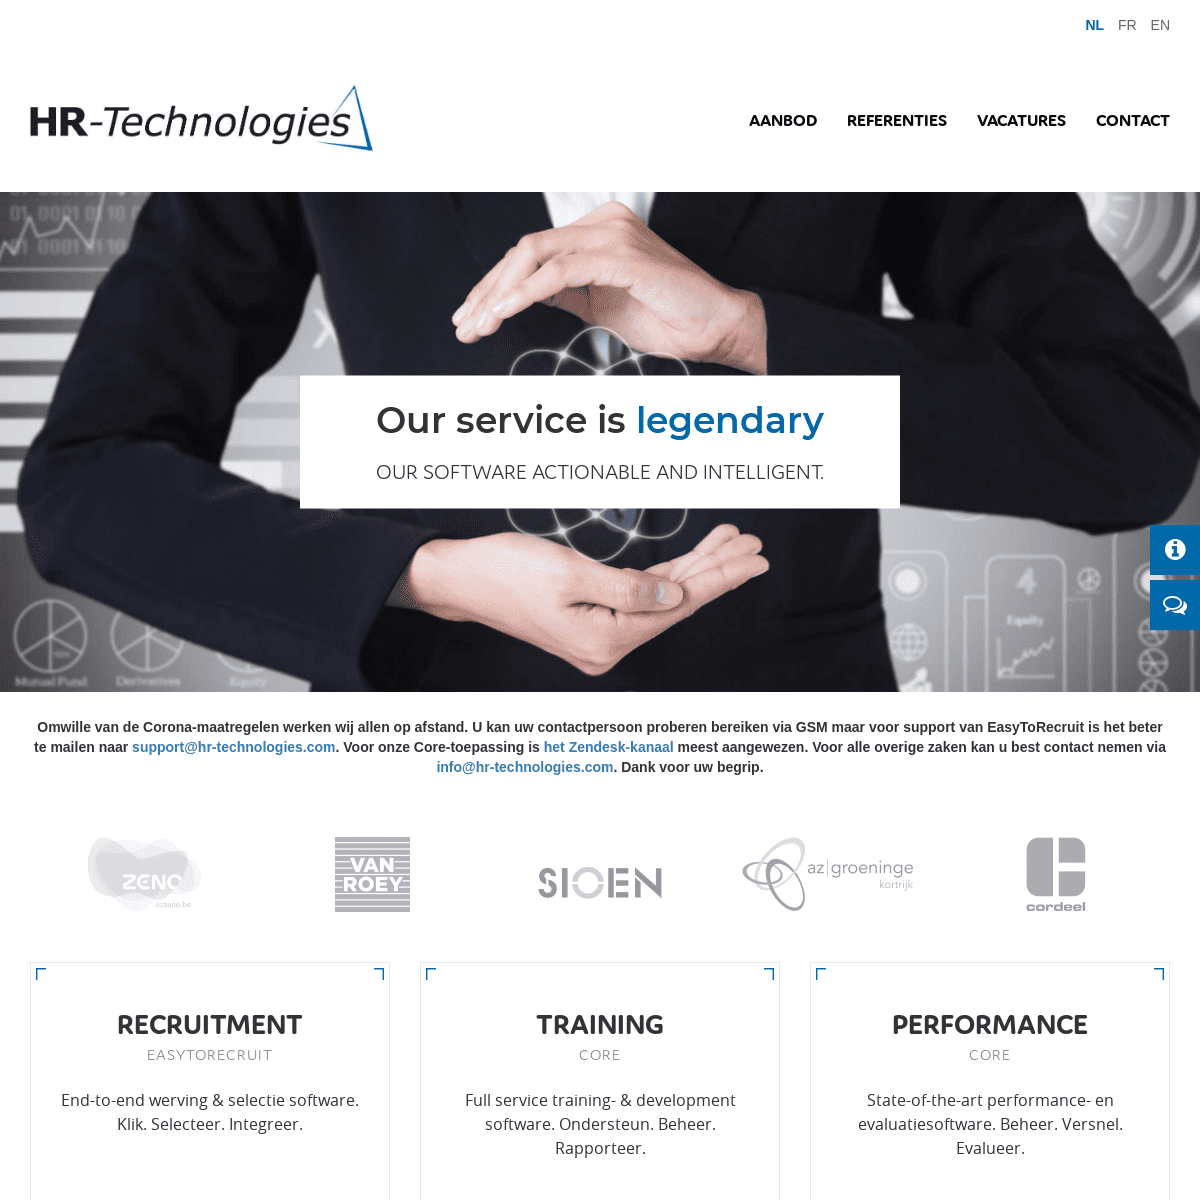 A complete backup of hr-technologies.com